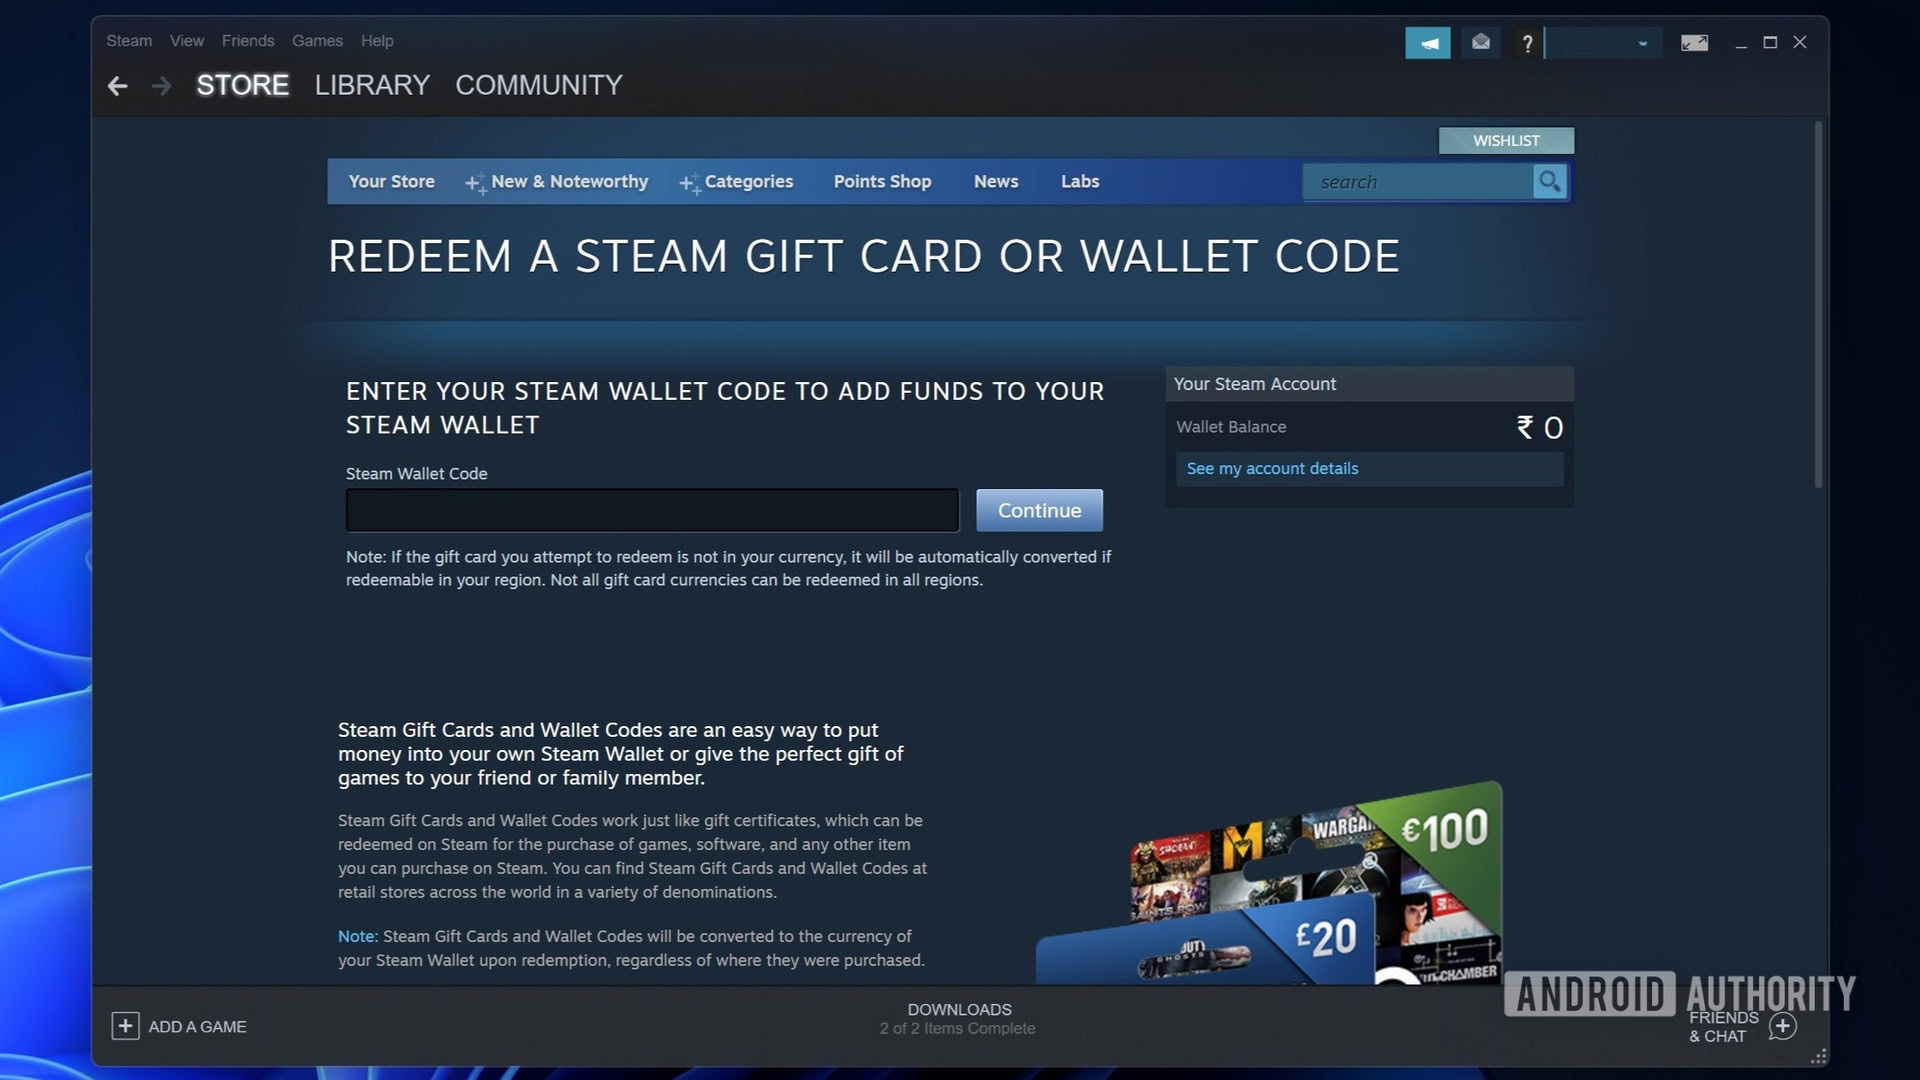 Where to buy a Steam gift card and which shops sell them?